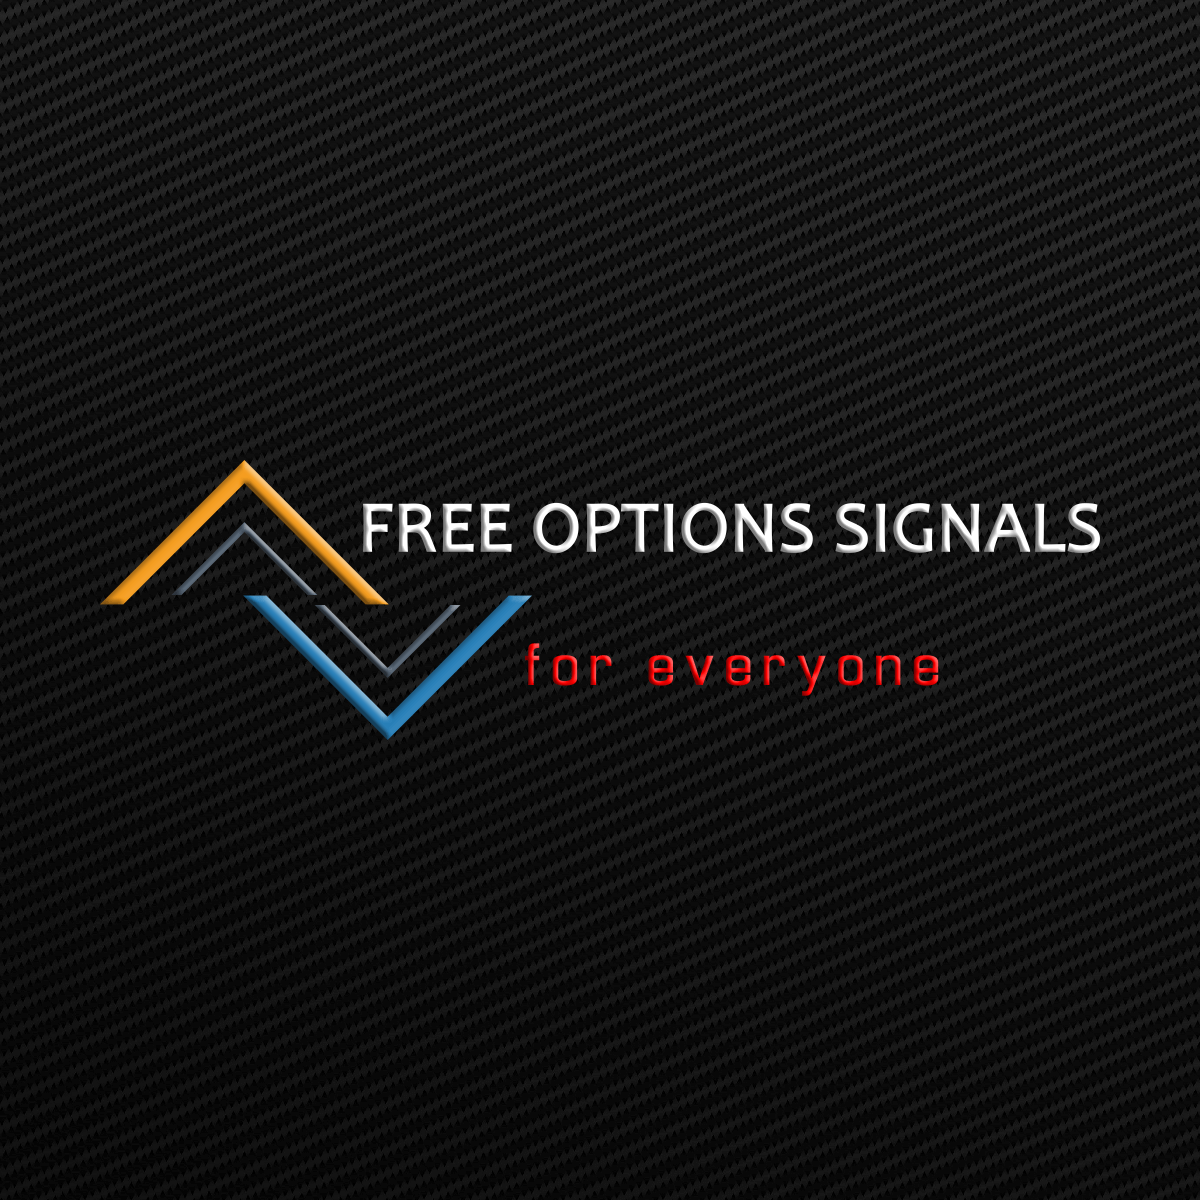 Binary options services